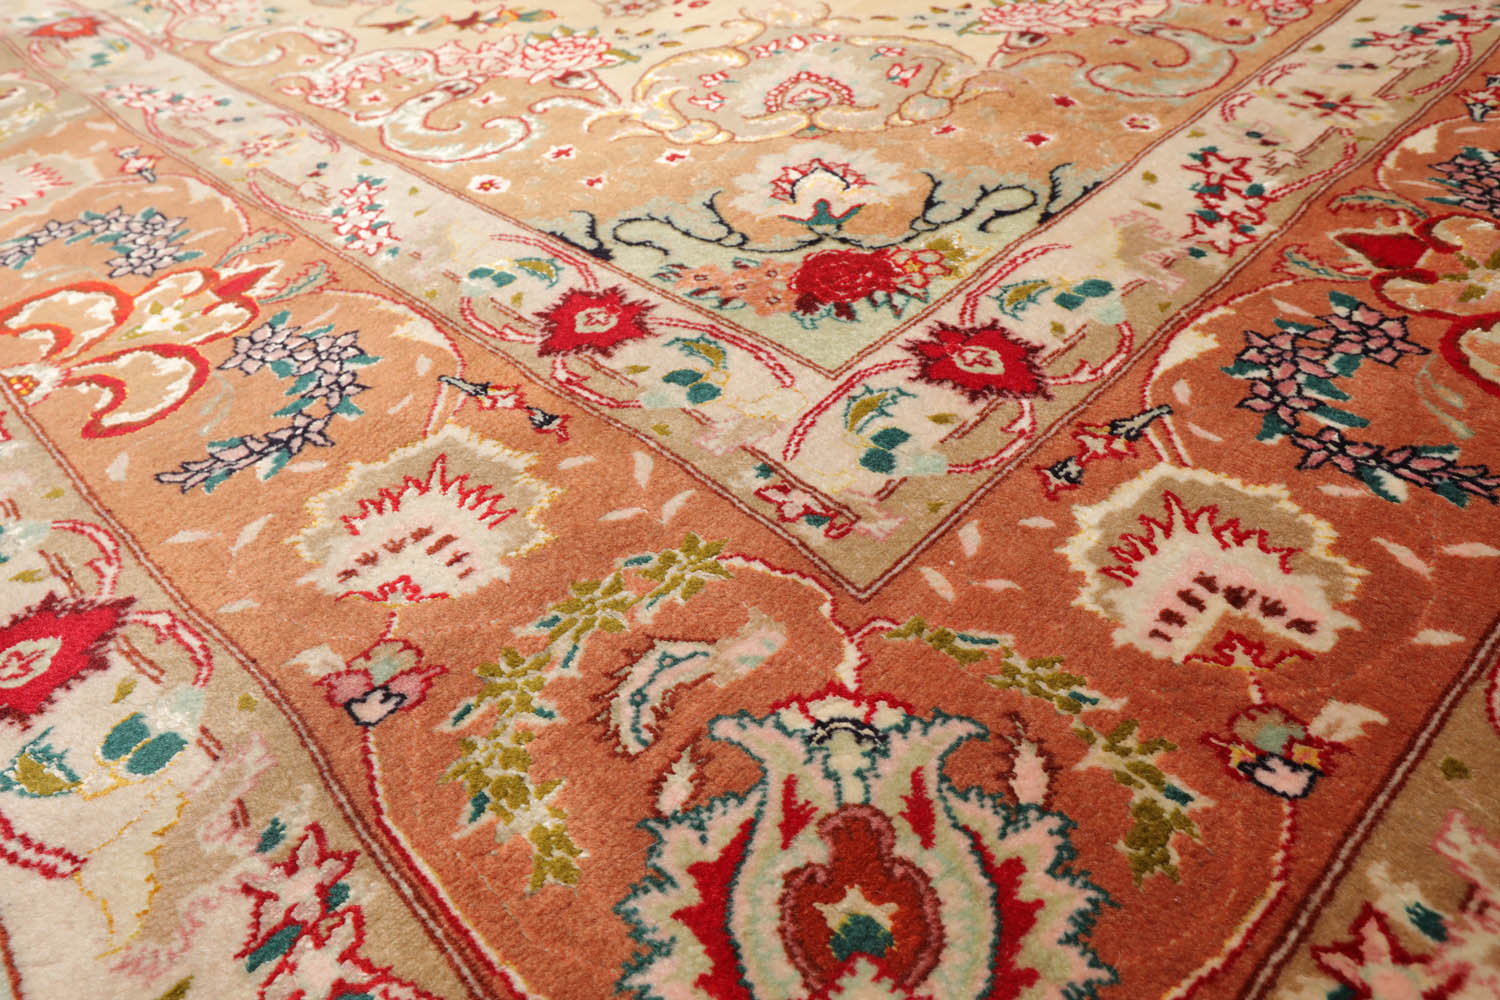 Bodine 6x9 Hand Knotted Wool and Silk Traditional Tabriz 300 KPSI Oriental Area Rug Ivory, Peach Color